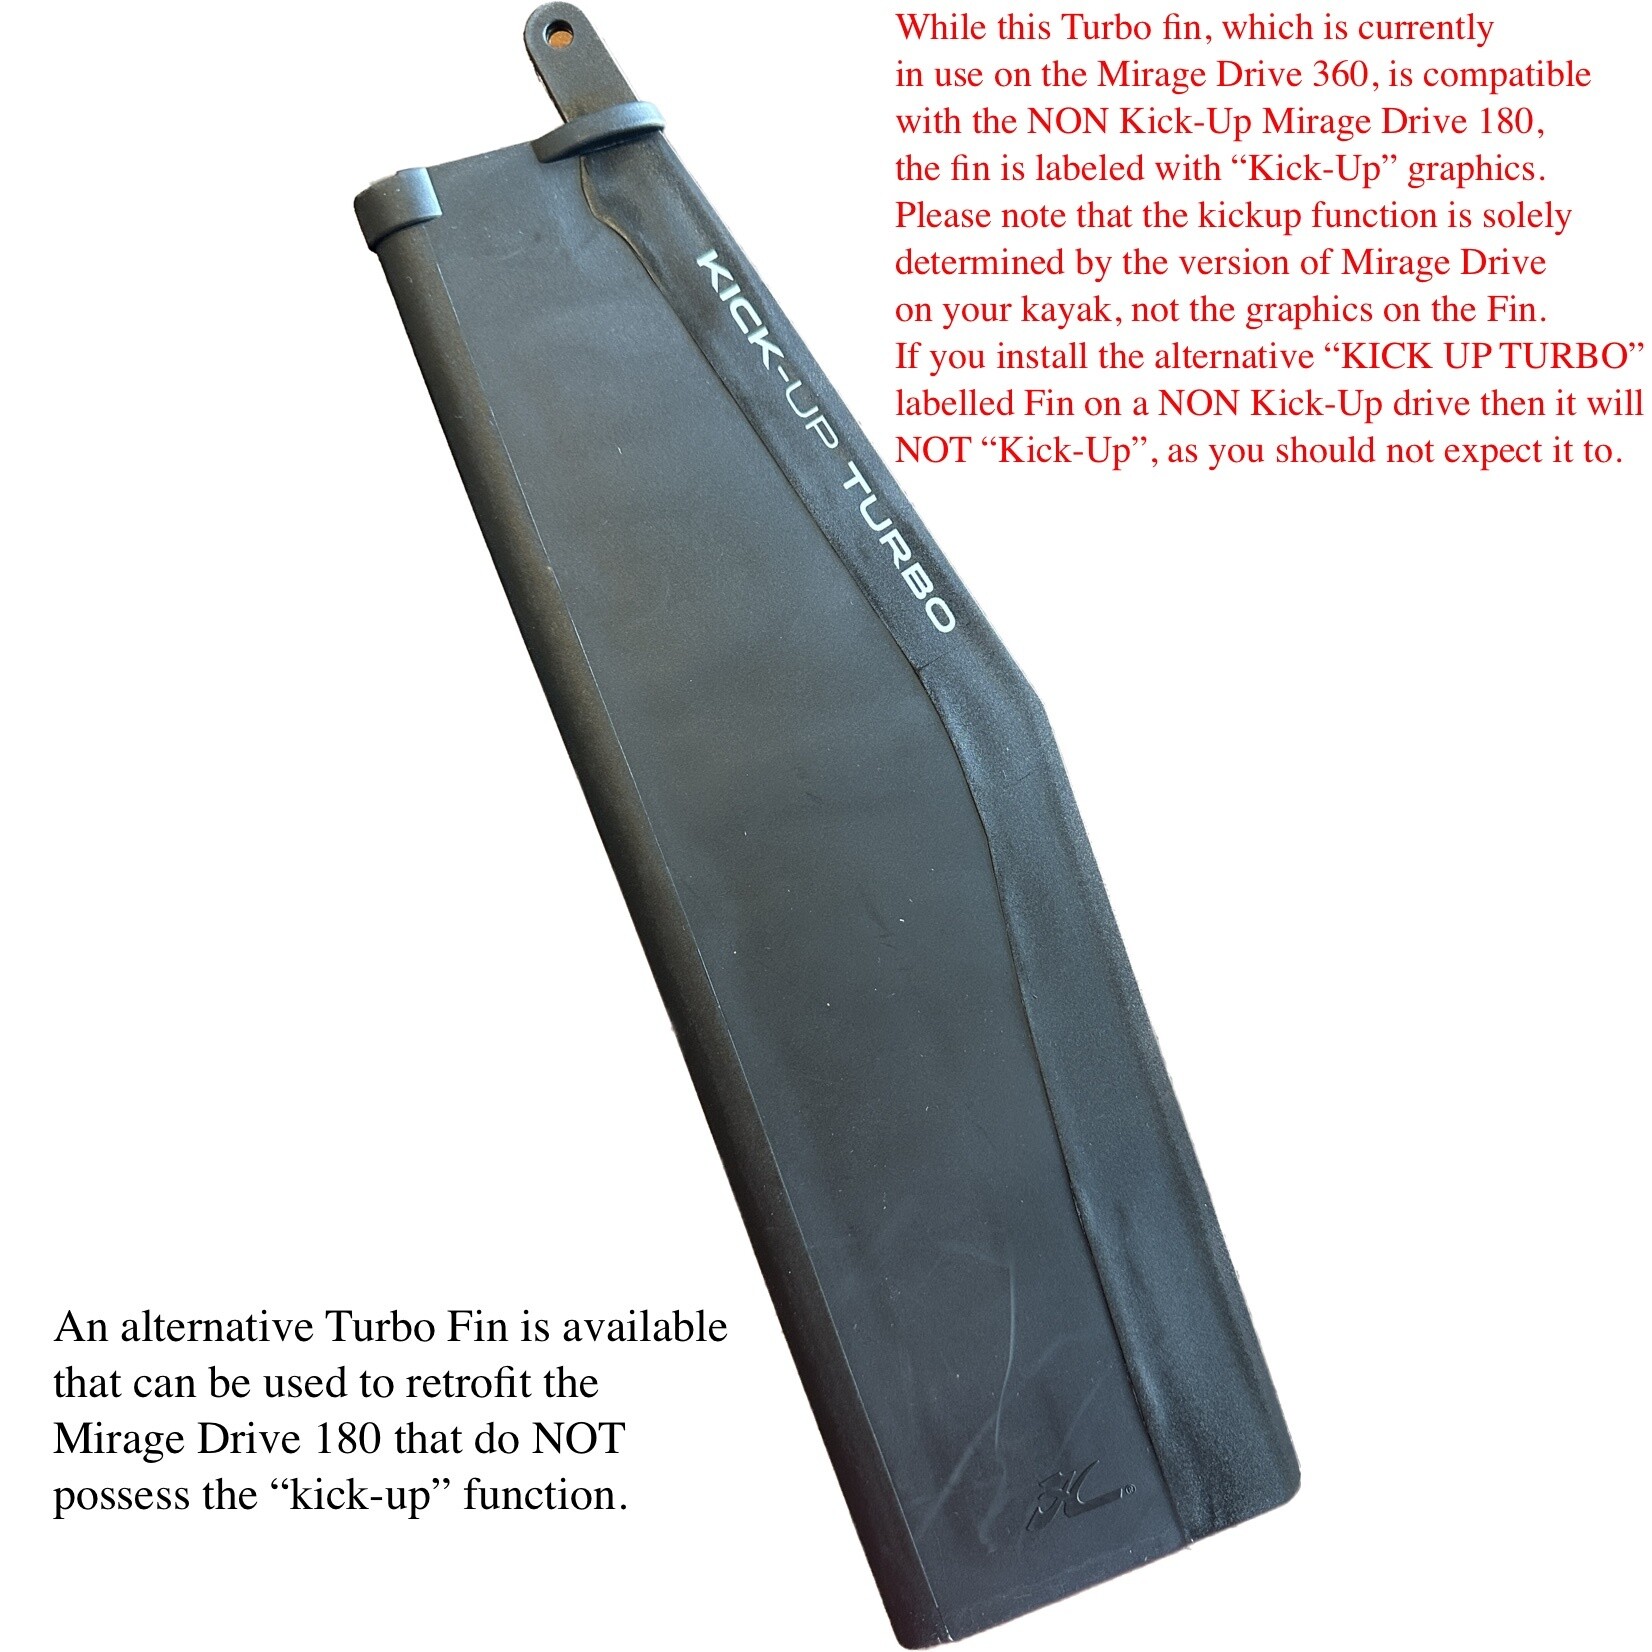 Hobie Fin Md180 Turbo (non Kick-Up) **Shipping alternative fin for the foreseeable future